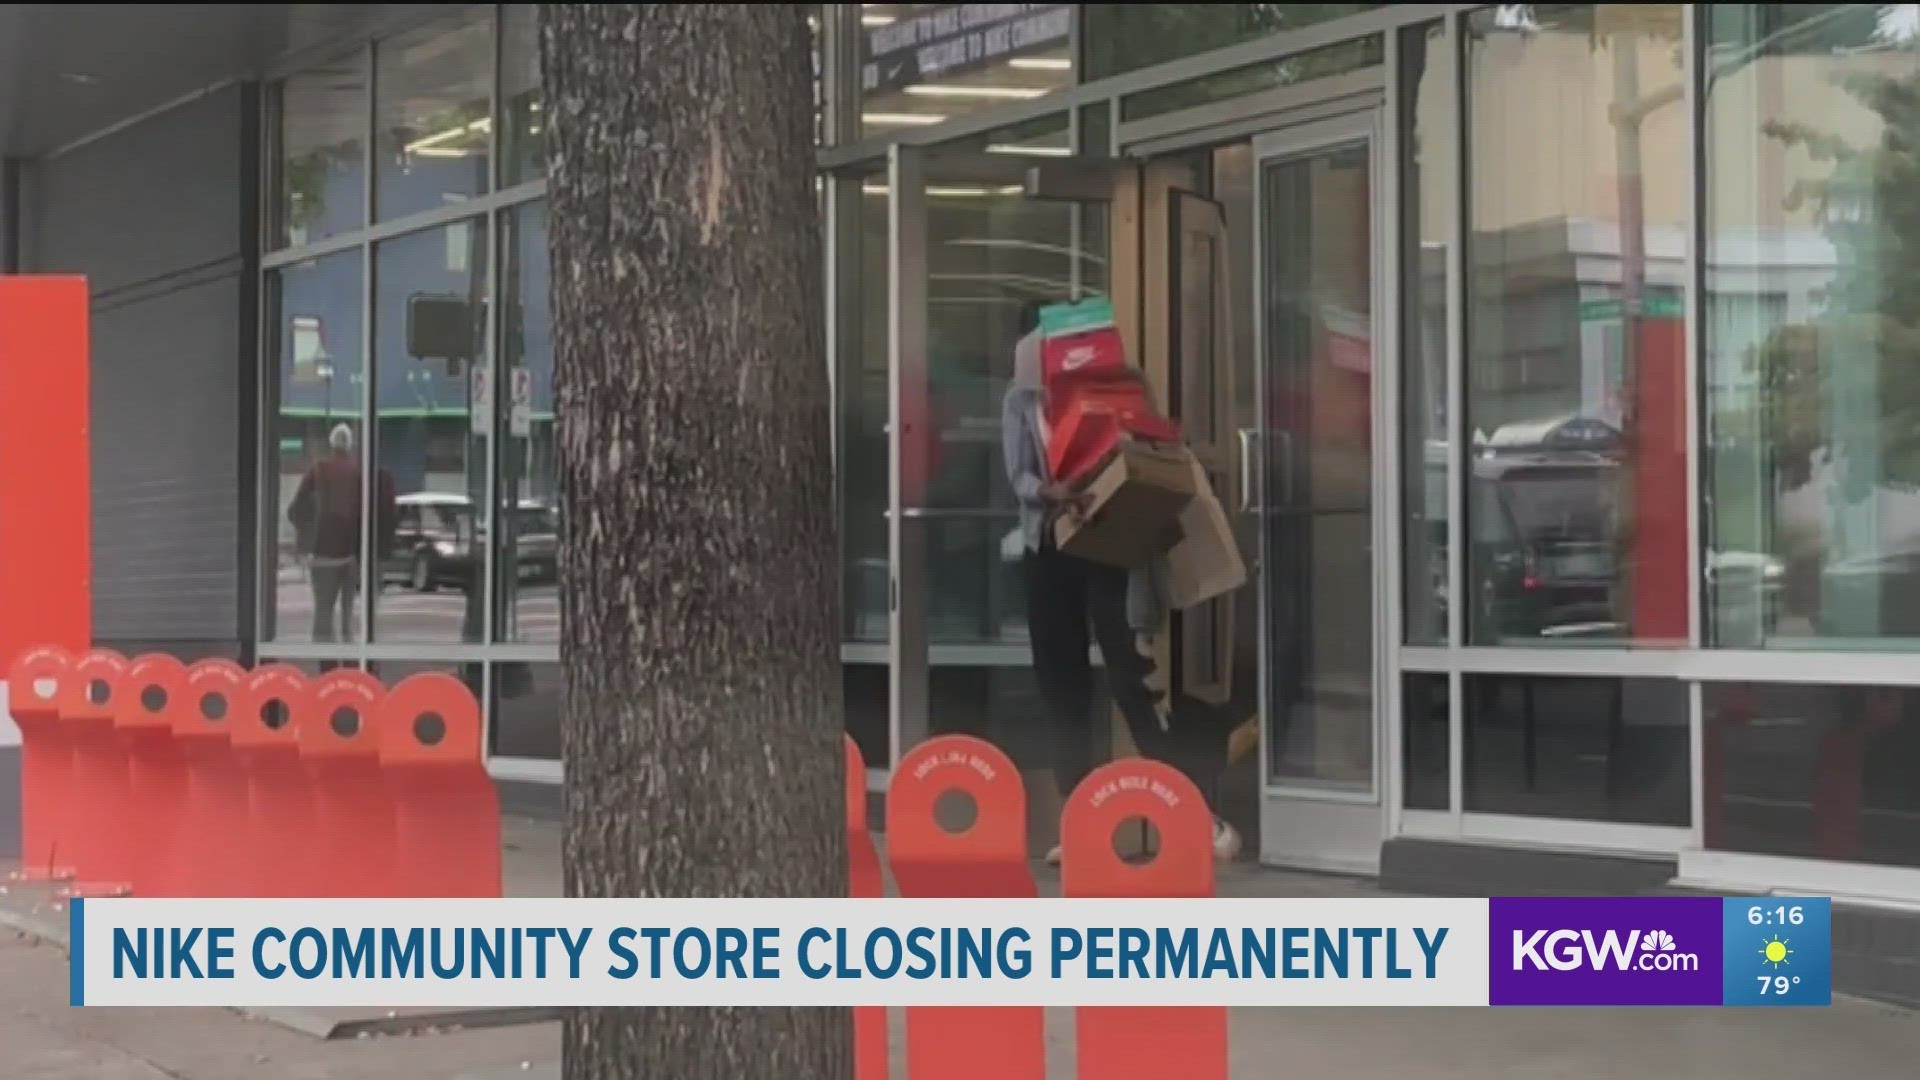 The store has been shuttered for the past year due to theft problems